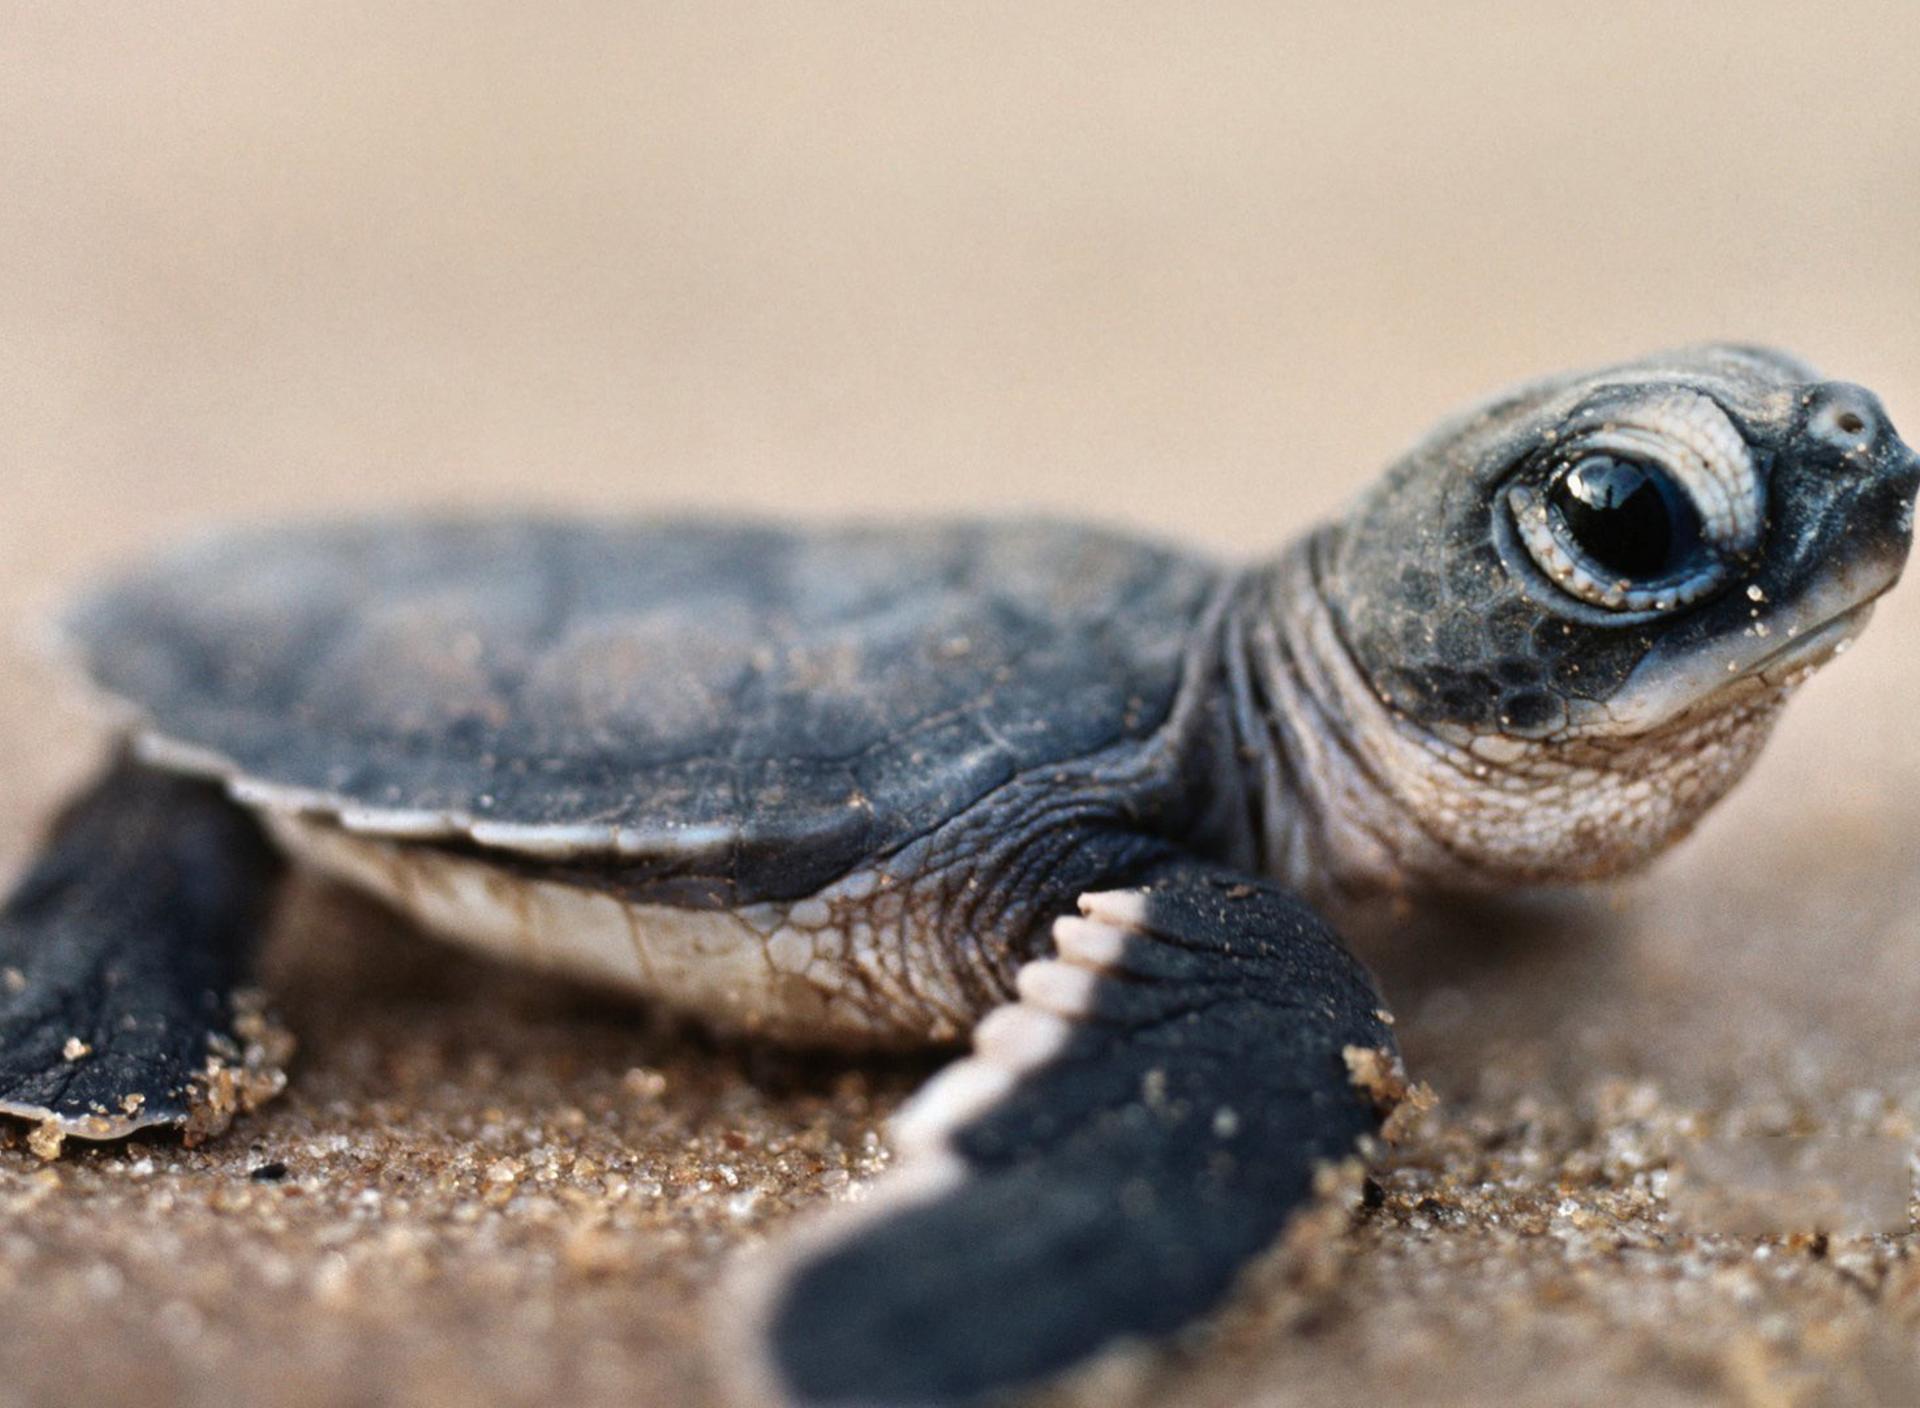 A baby turtle on the gravel in a HD wallpaper